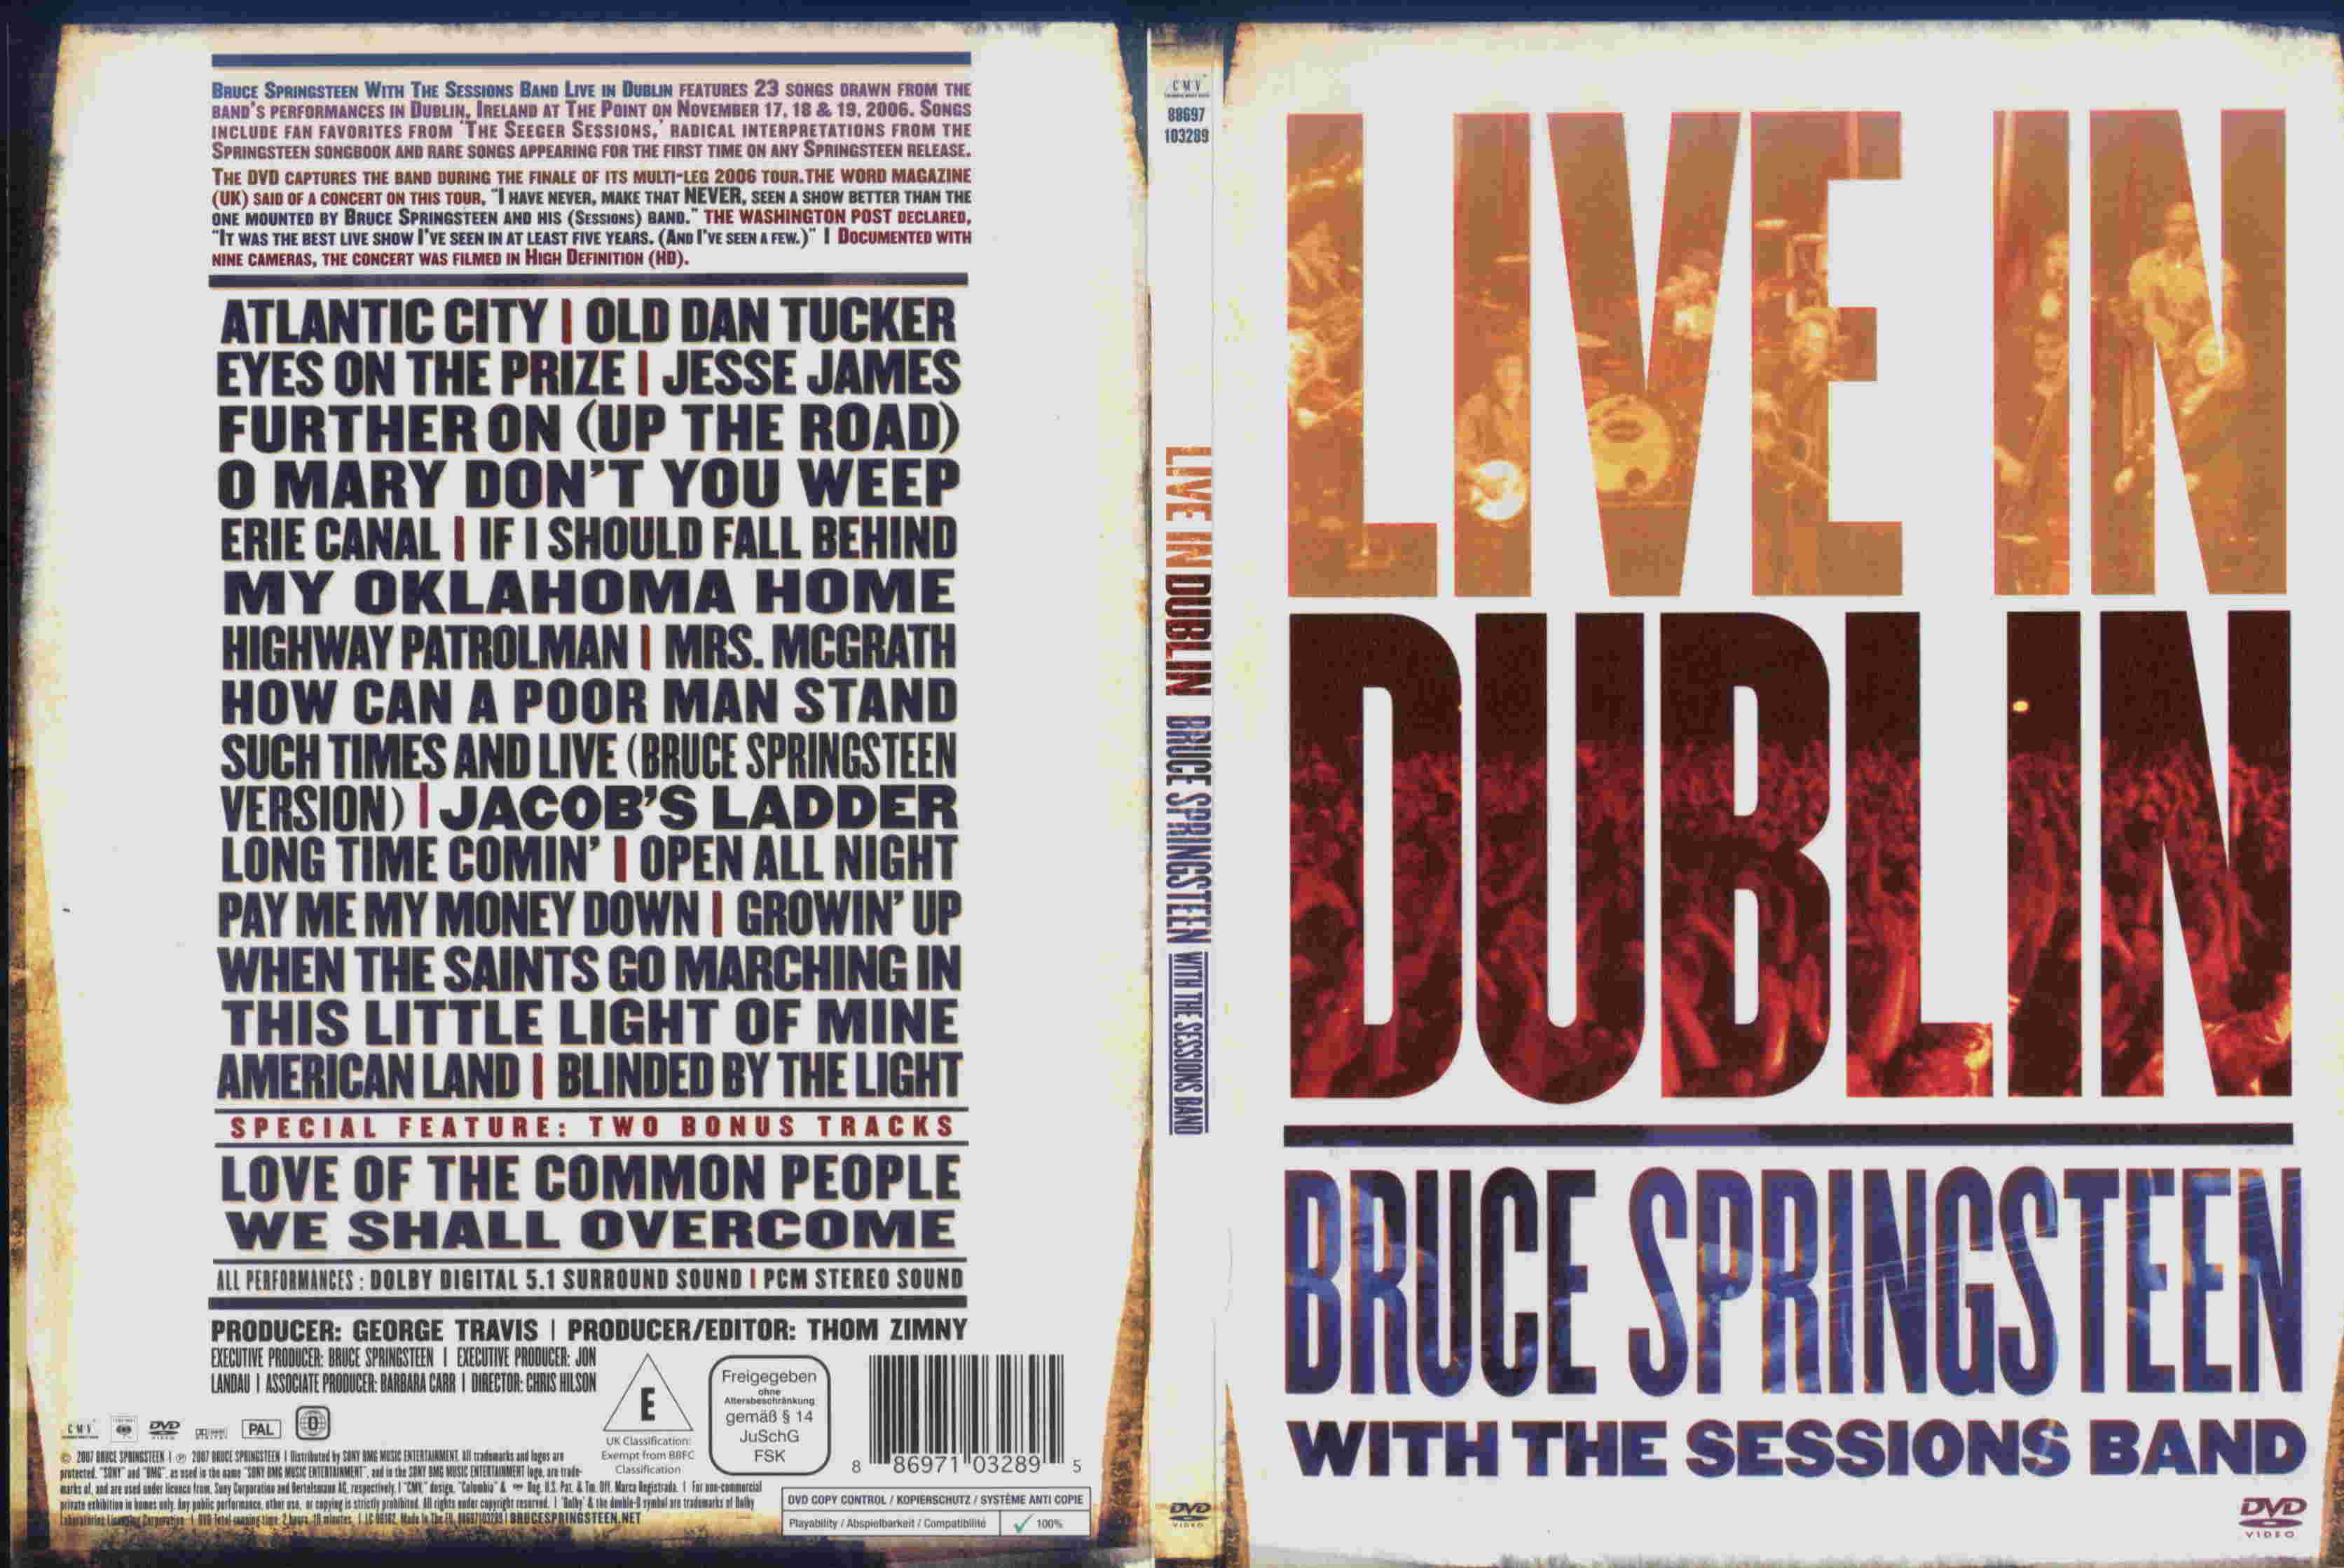 Bruce Springsteen Live In Dublin 2006 : Front | DVD Covers | Cover 